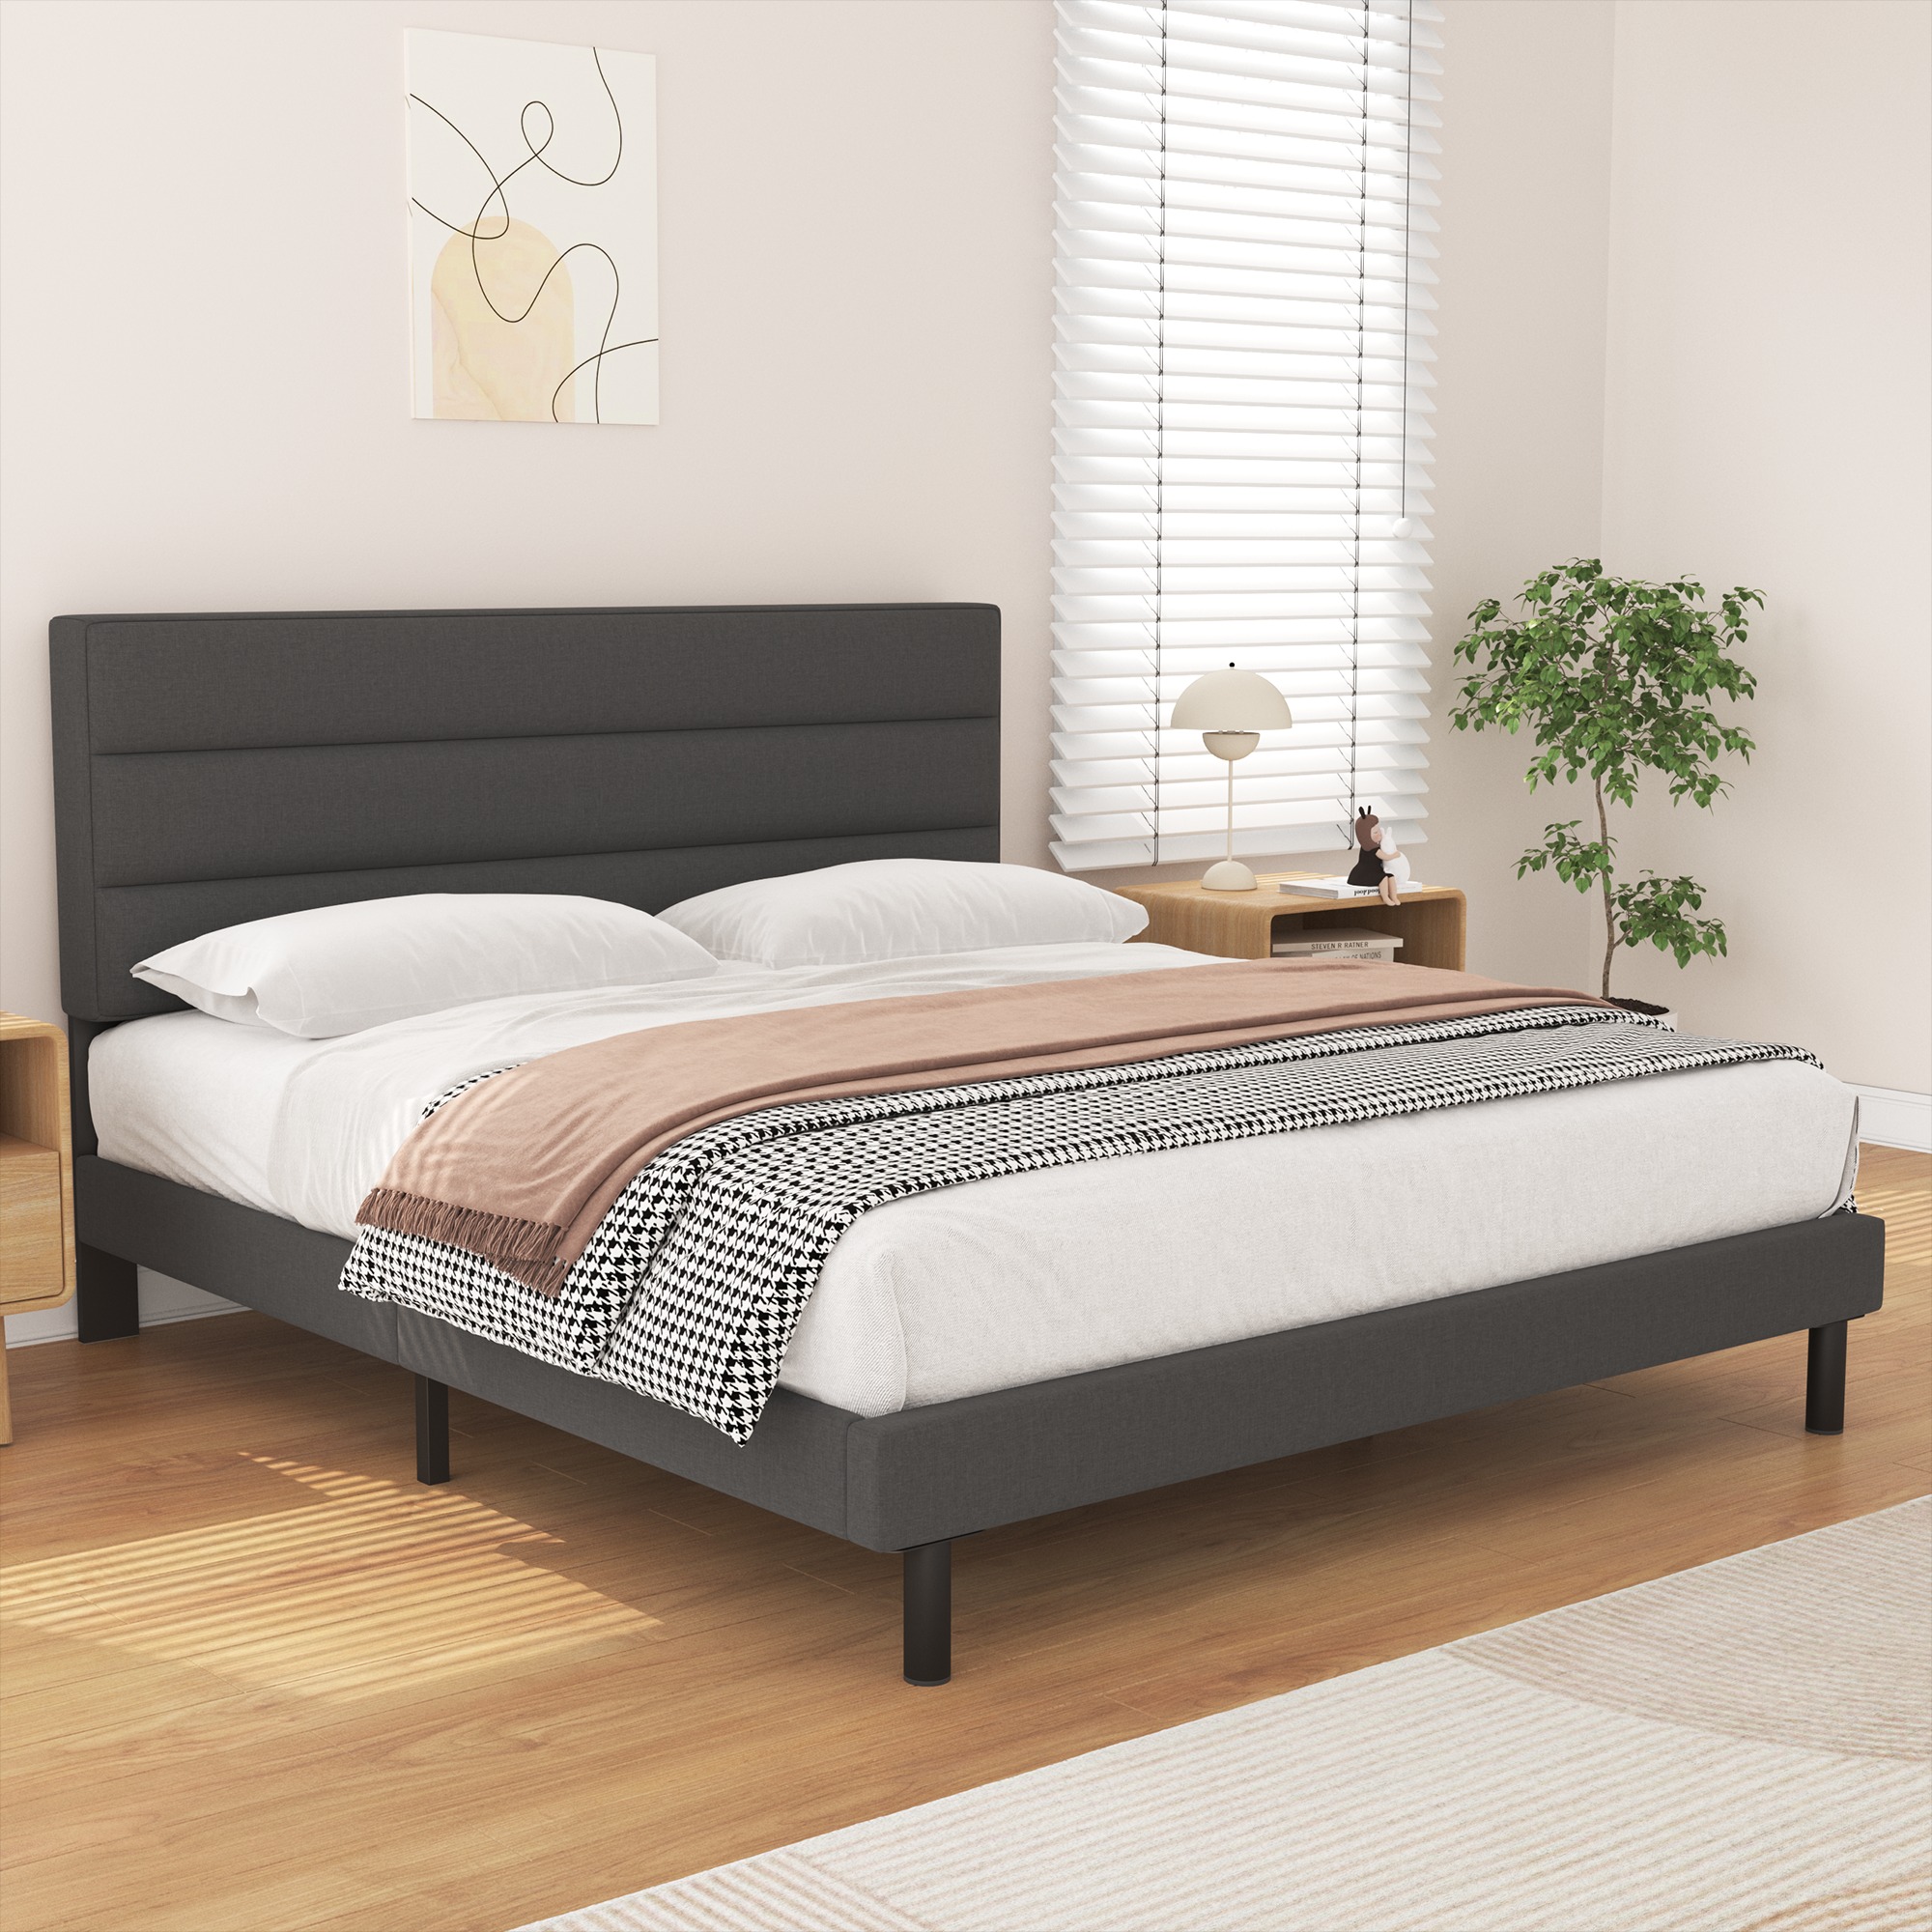 Twin Bed Frame, HAIIDE Twin Size Platform Bed with Wingback Fabric Upholstered Headboard, Dark Gray - image 2 of 8